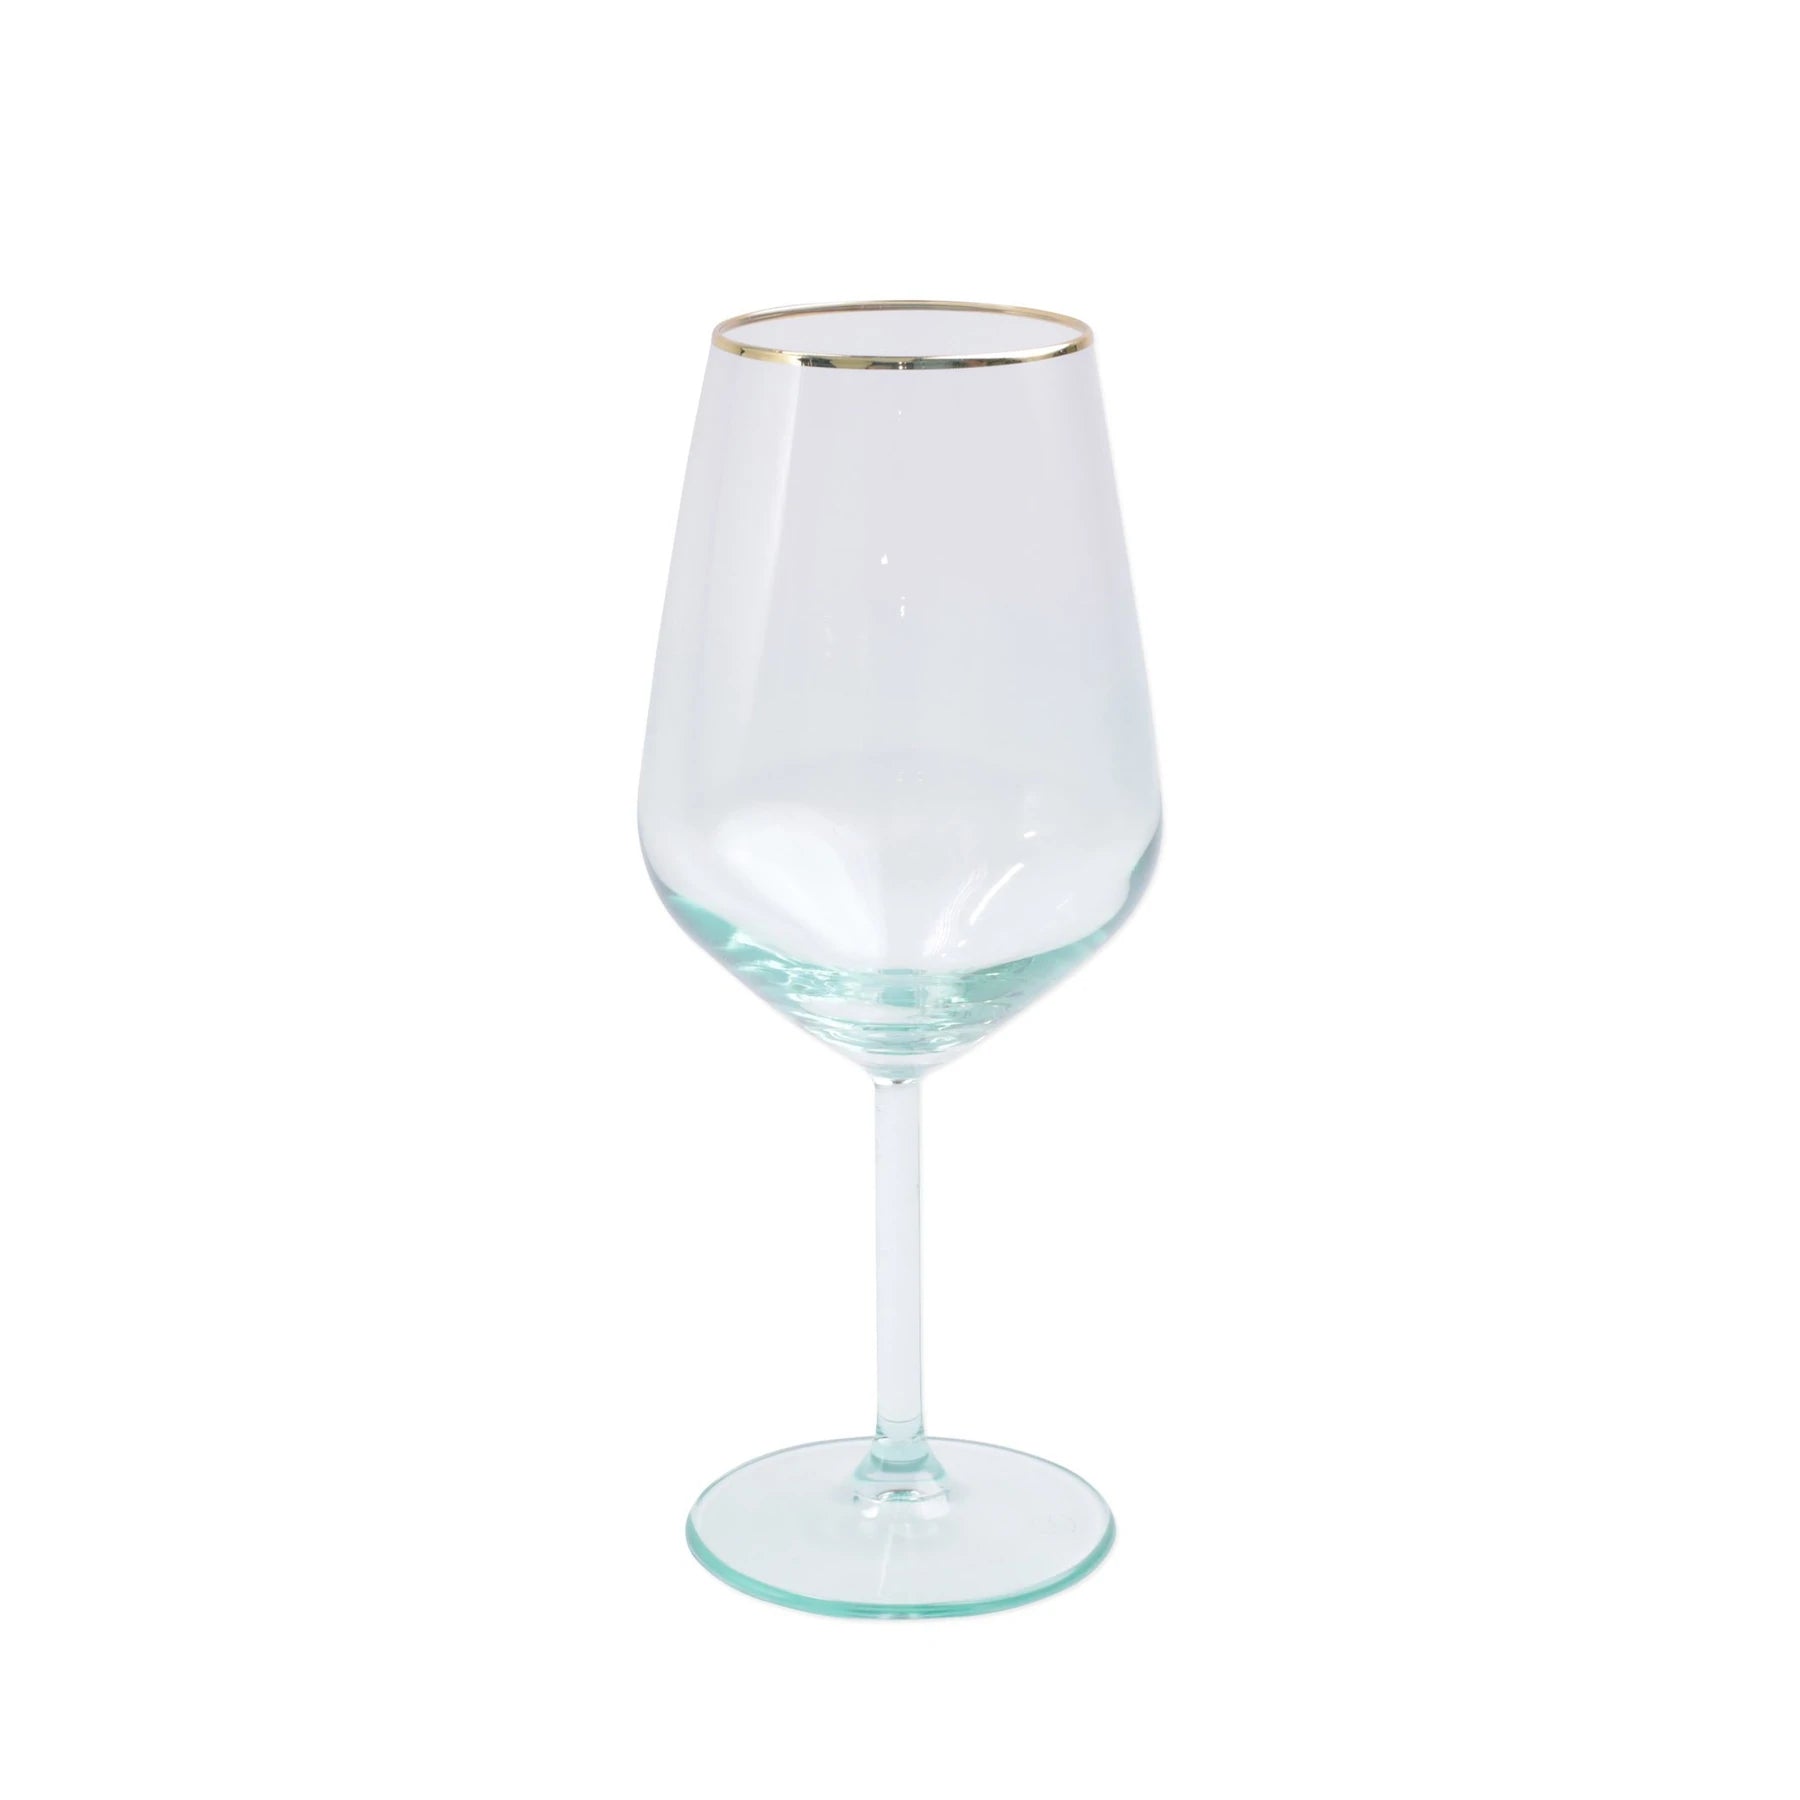 Vietri Rainbow Wine Collection, Available in multiple colors